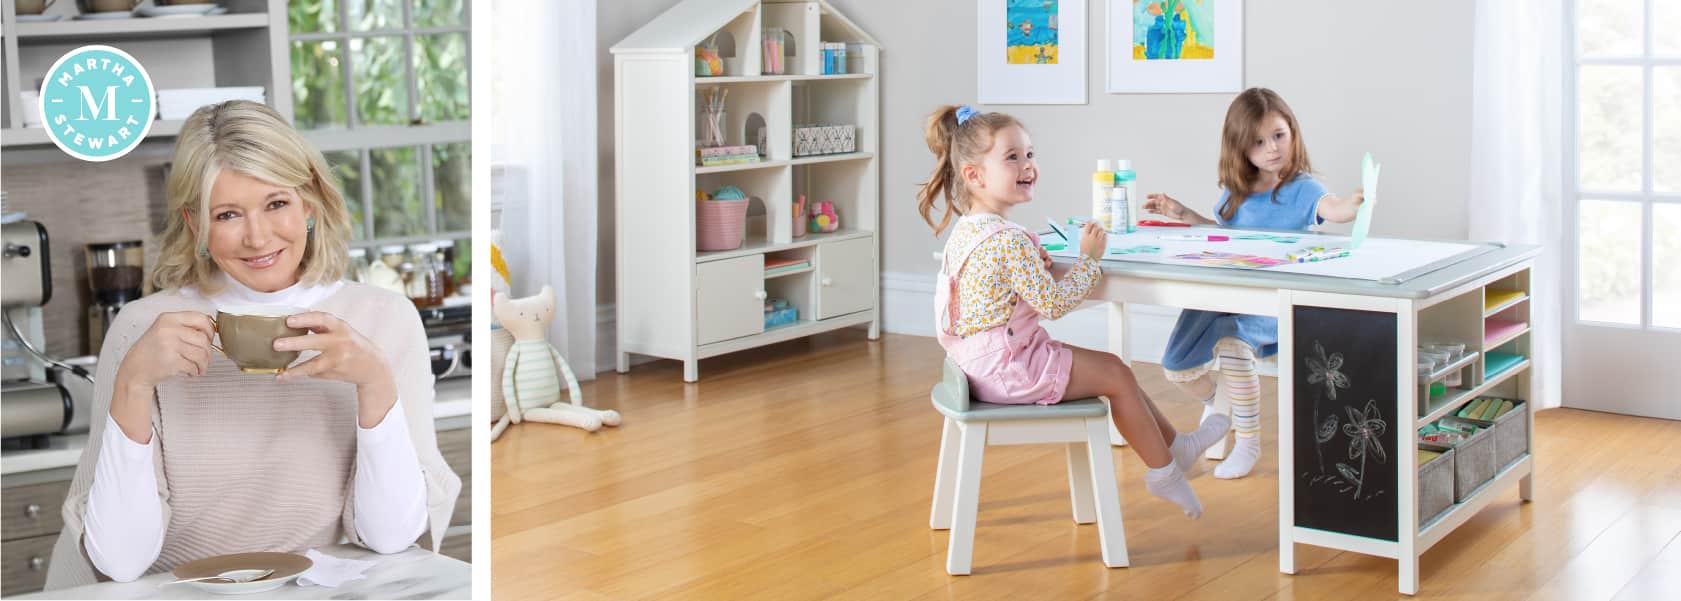 Small furniture for kids with big imaginations